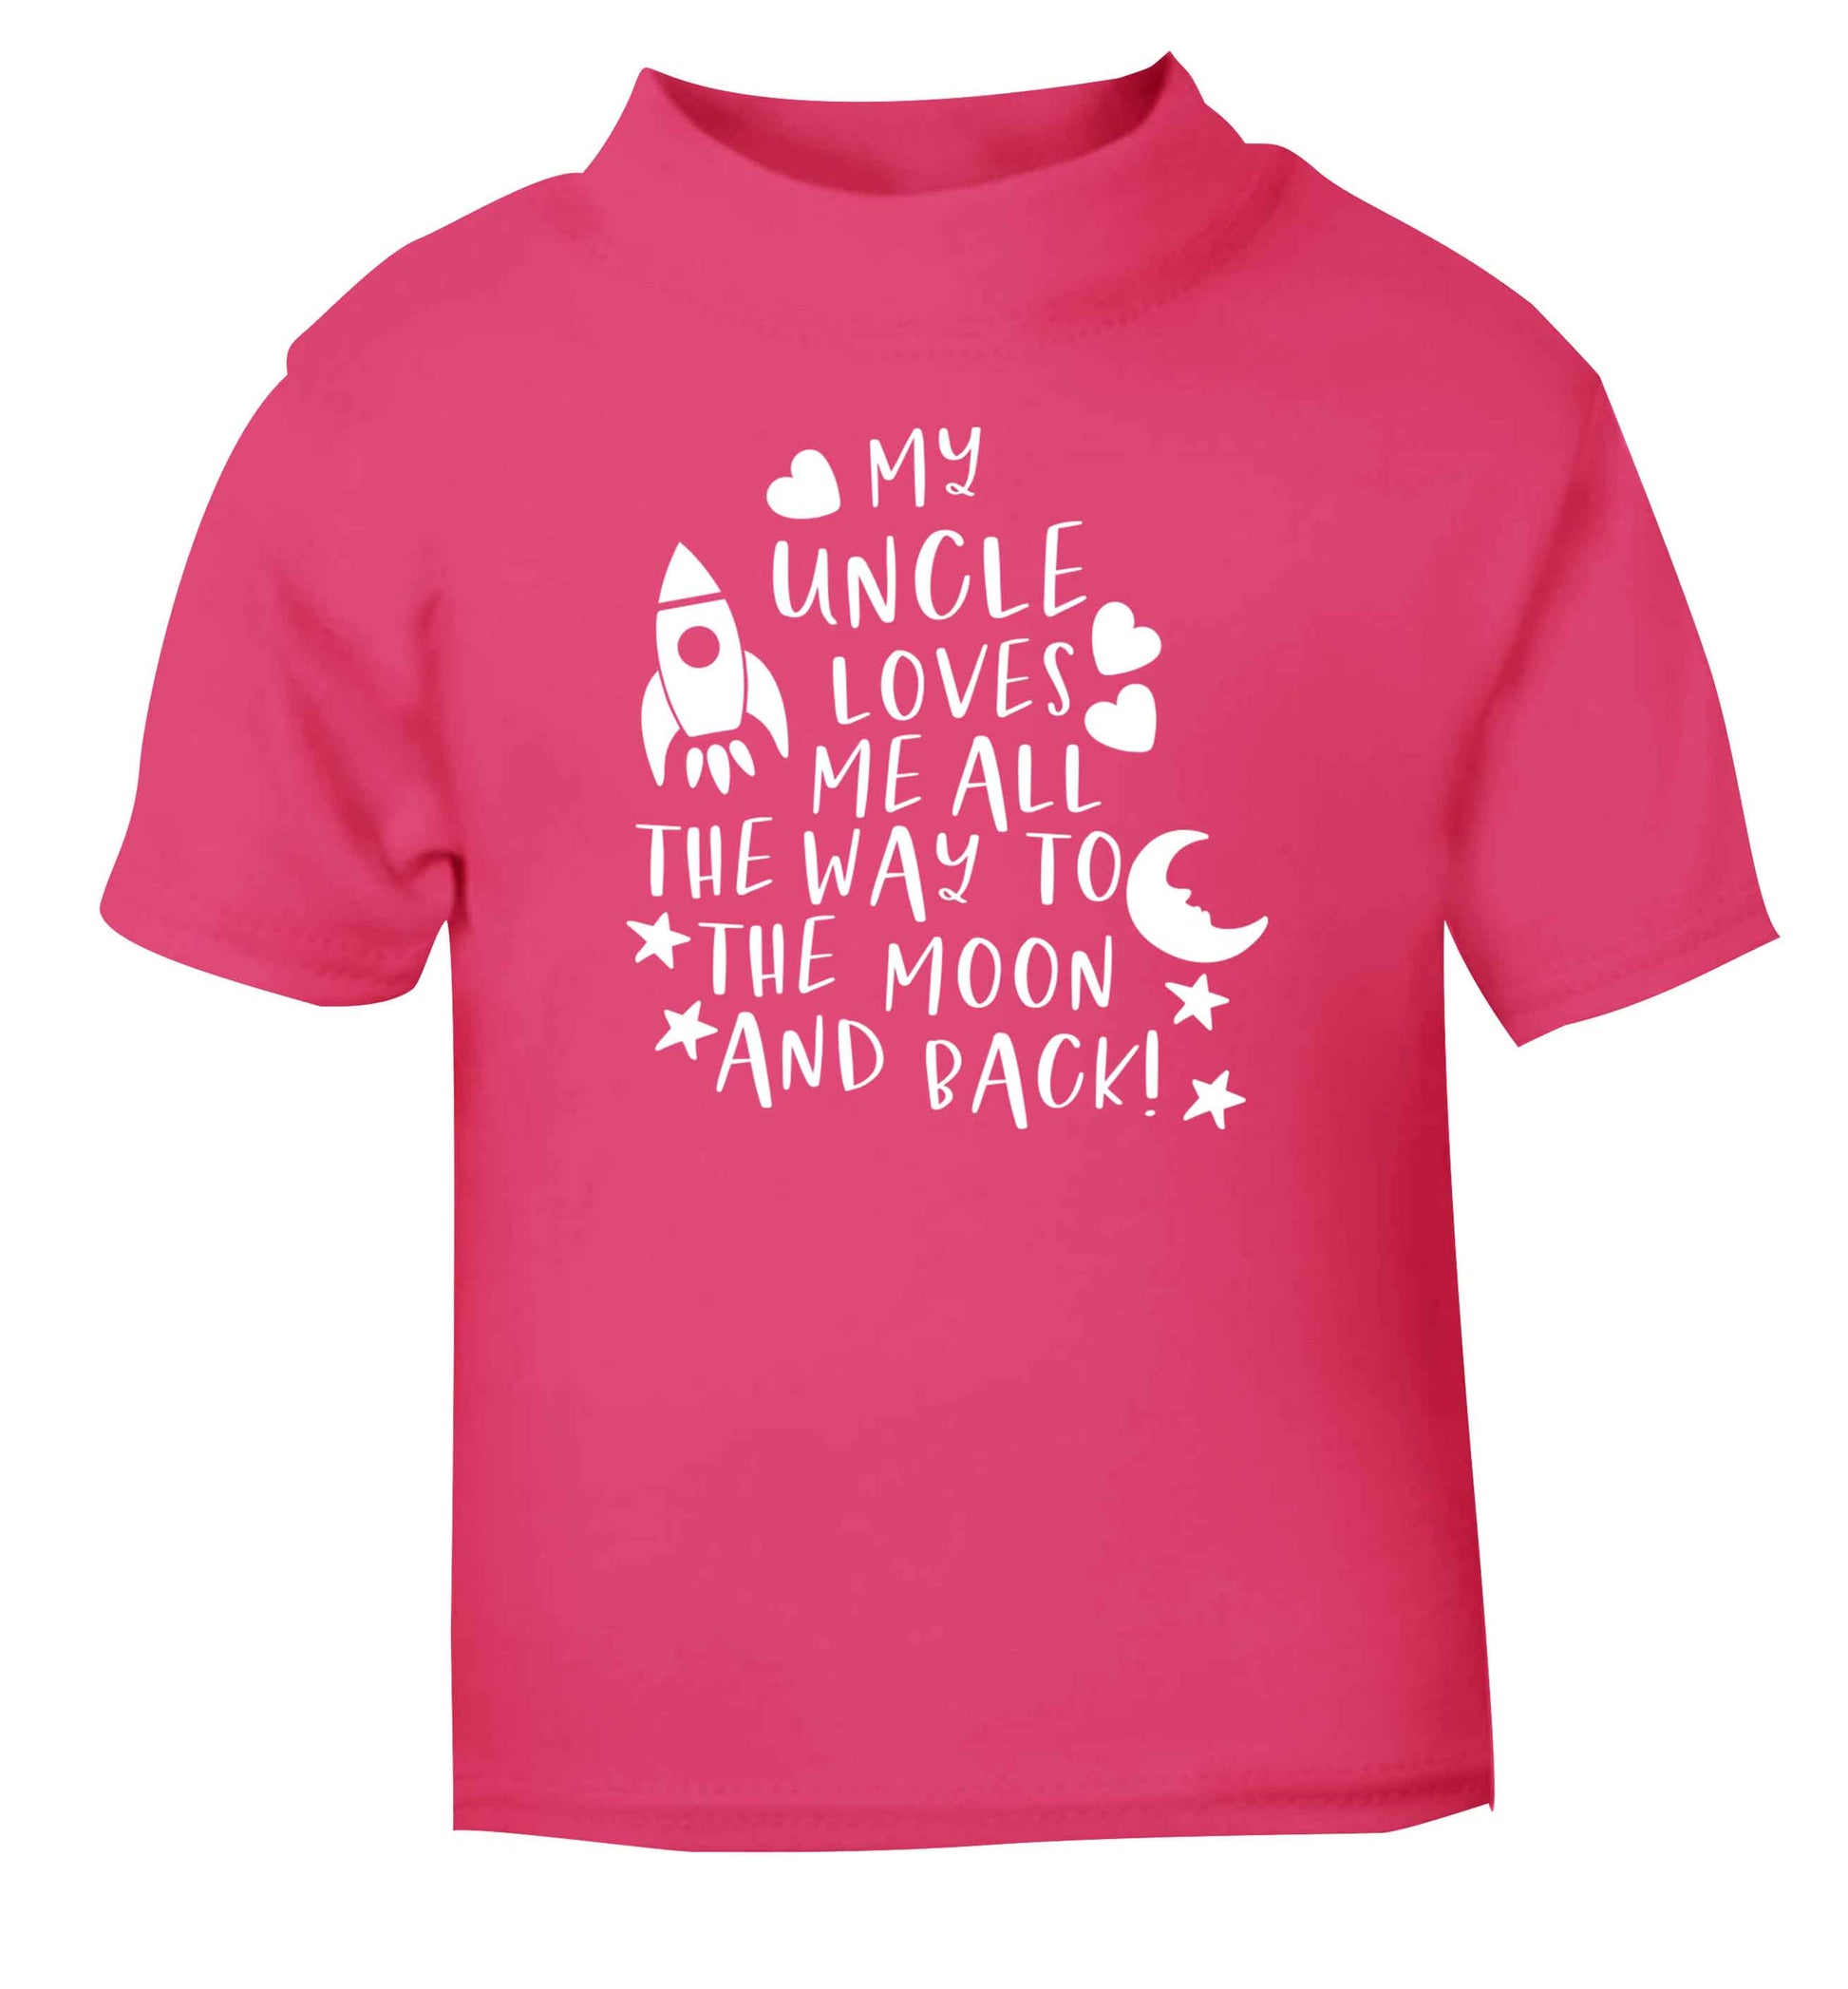 My uncle loves me all the way to the moon and back pink Baby Toddler Tshirt 2 Years